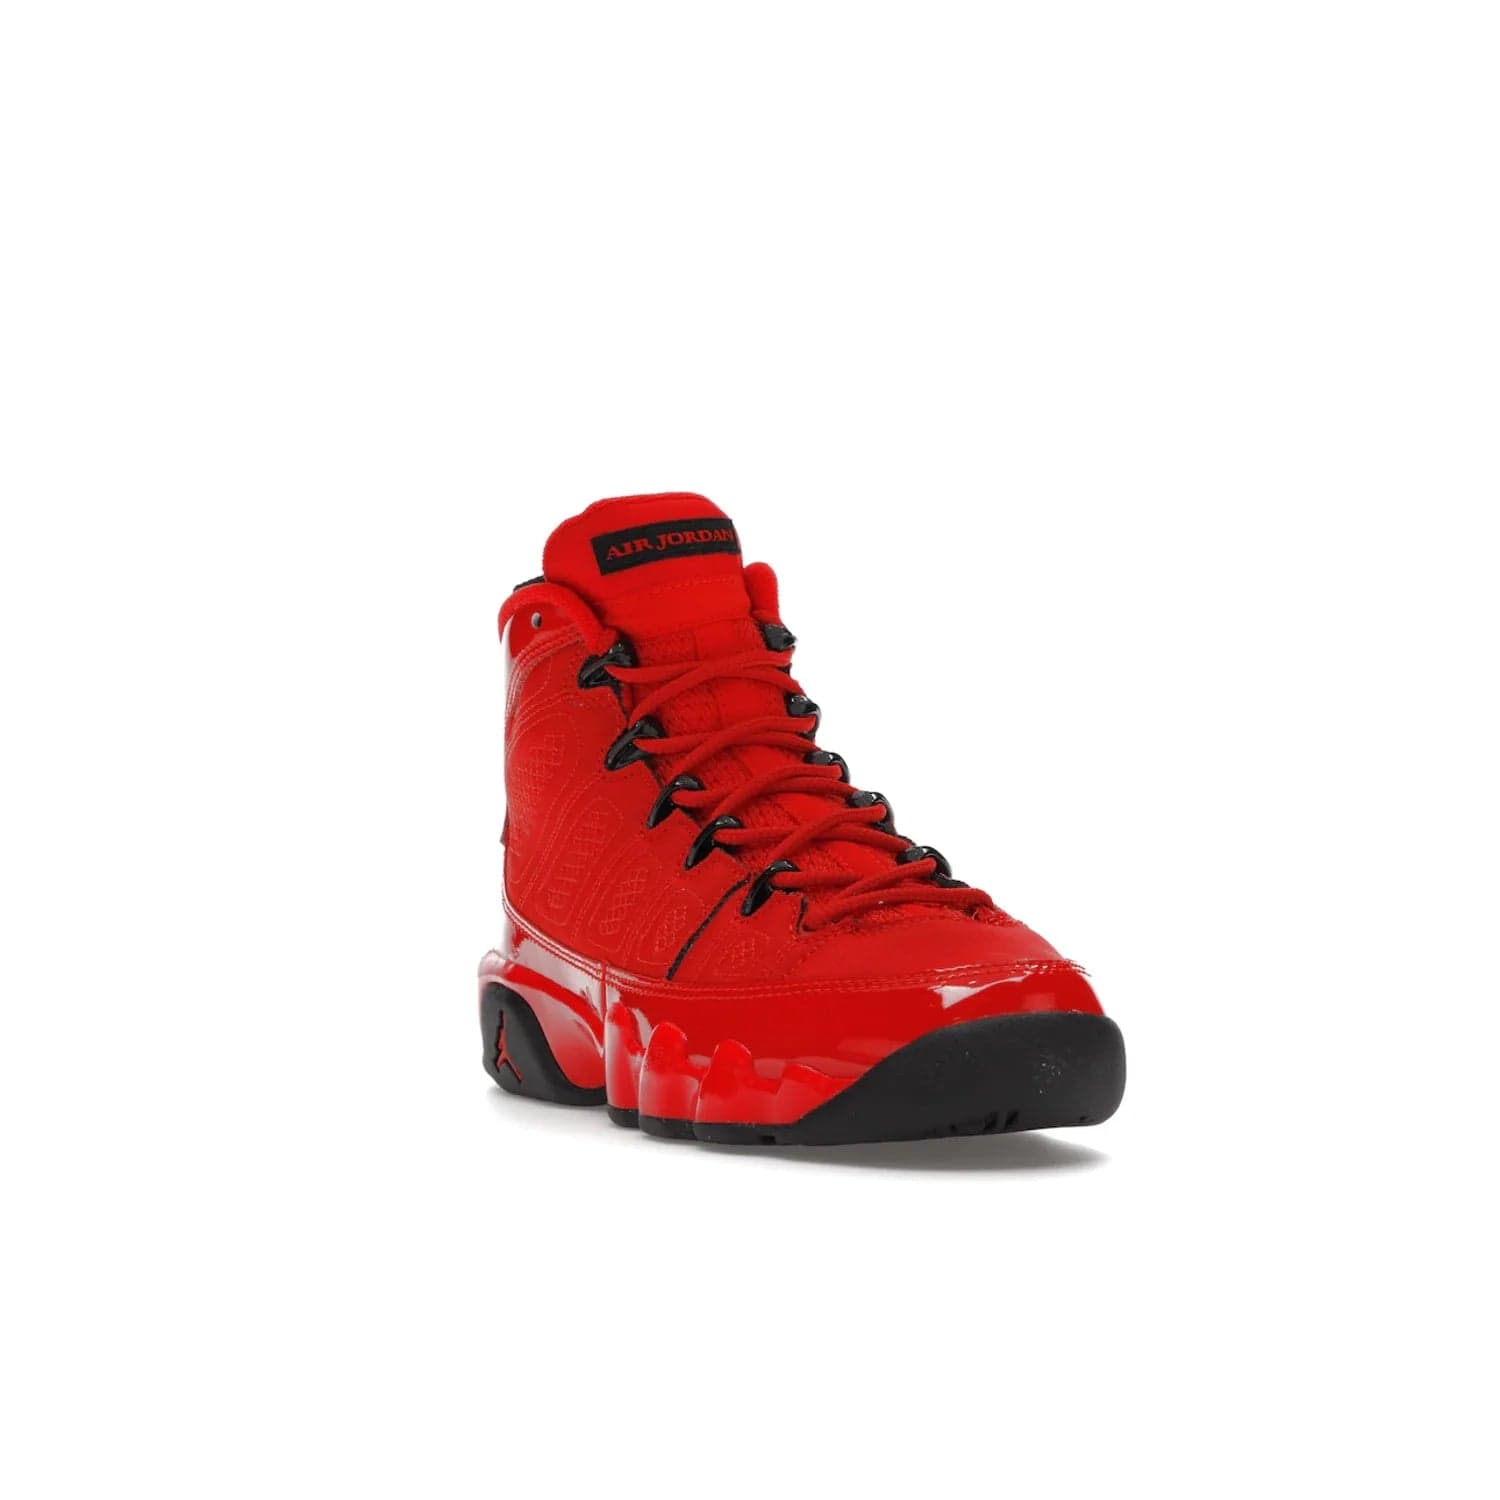 Jordan 9 Retro Chile Red (GS) - Image 7 - Only at www.BallersClubKickz.com - Introducing the Air Jordan 9 Retro Chile Red (GS), a vintage 1993 silhouette with fiery colorway. Features quilted side paneling, glossy patent leather, pull tabs, black contrast accents, and foam midsole. Launching May 2022 for $140.